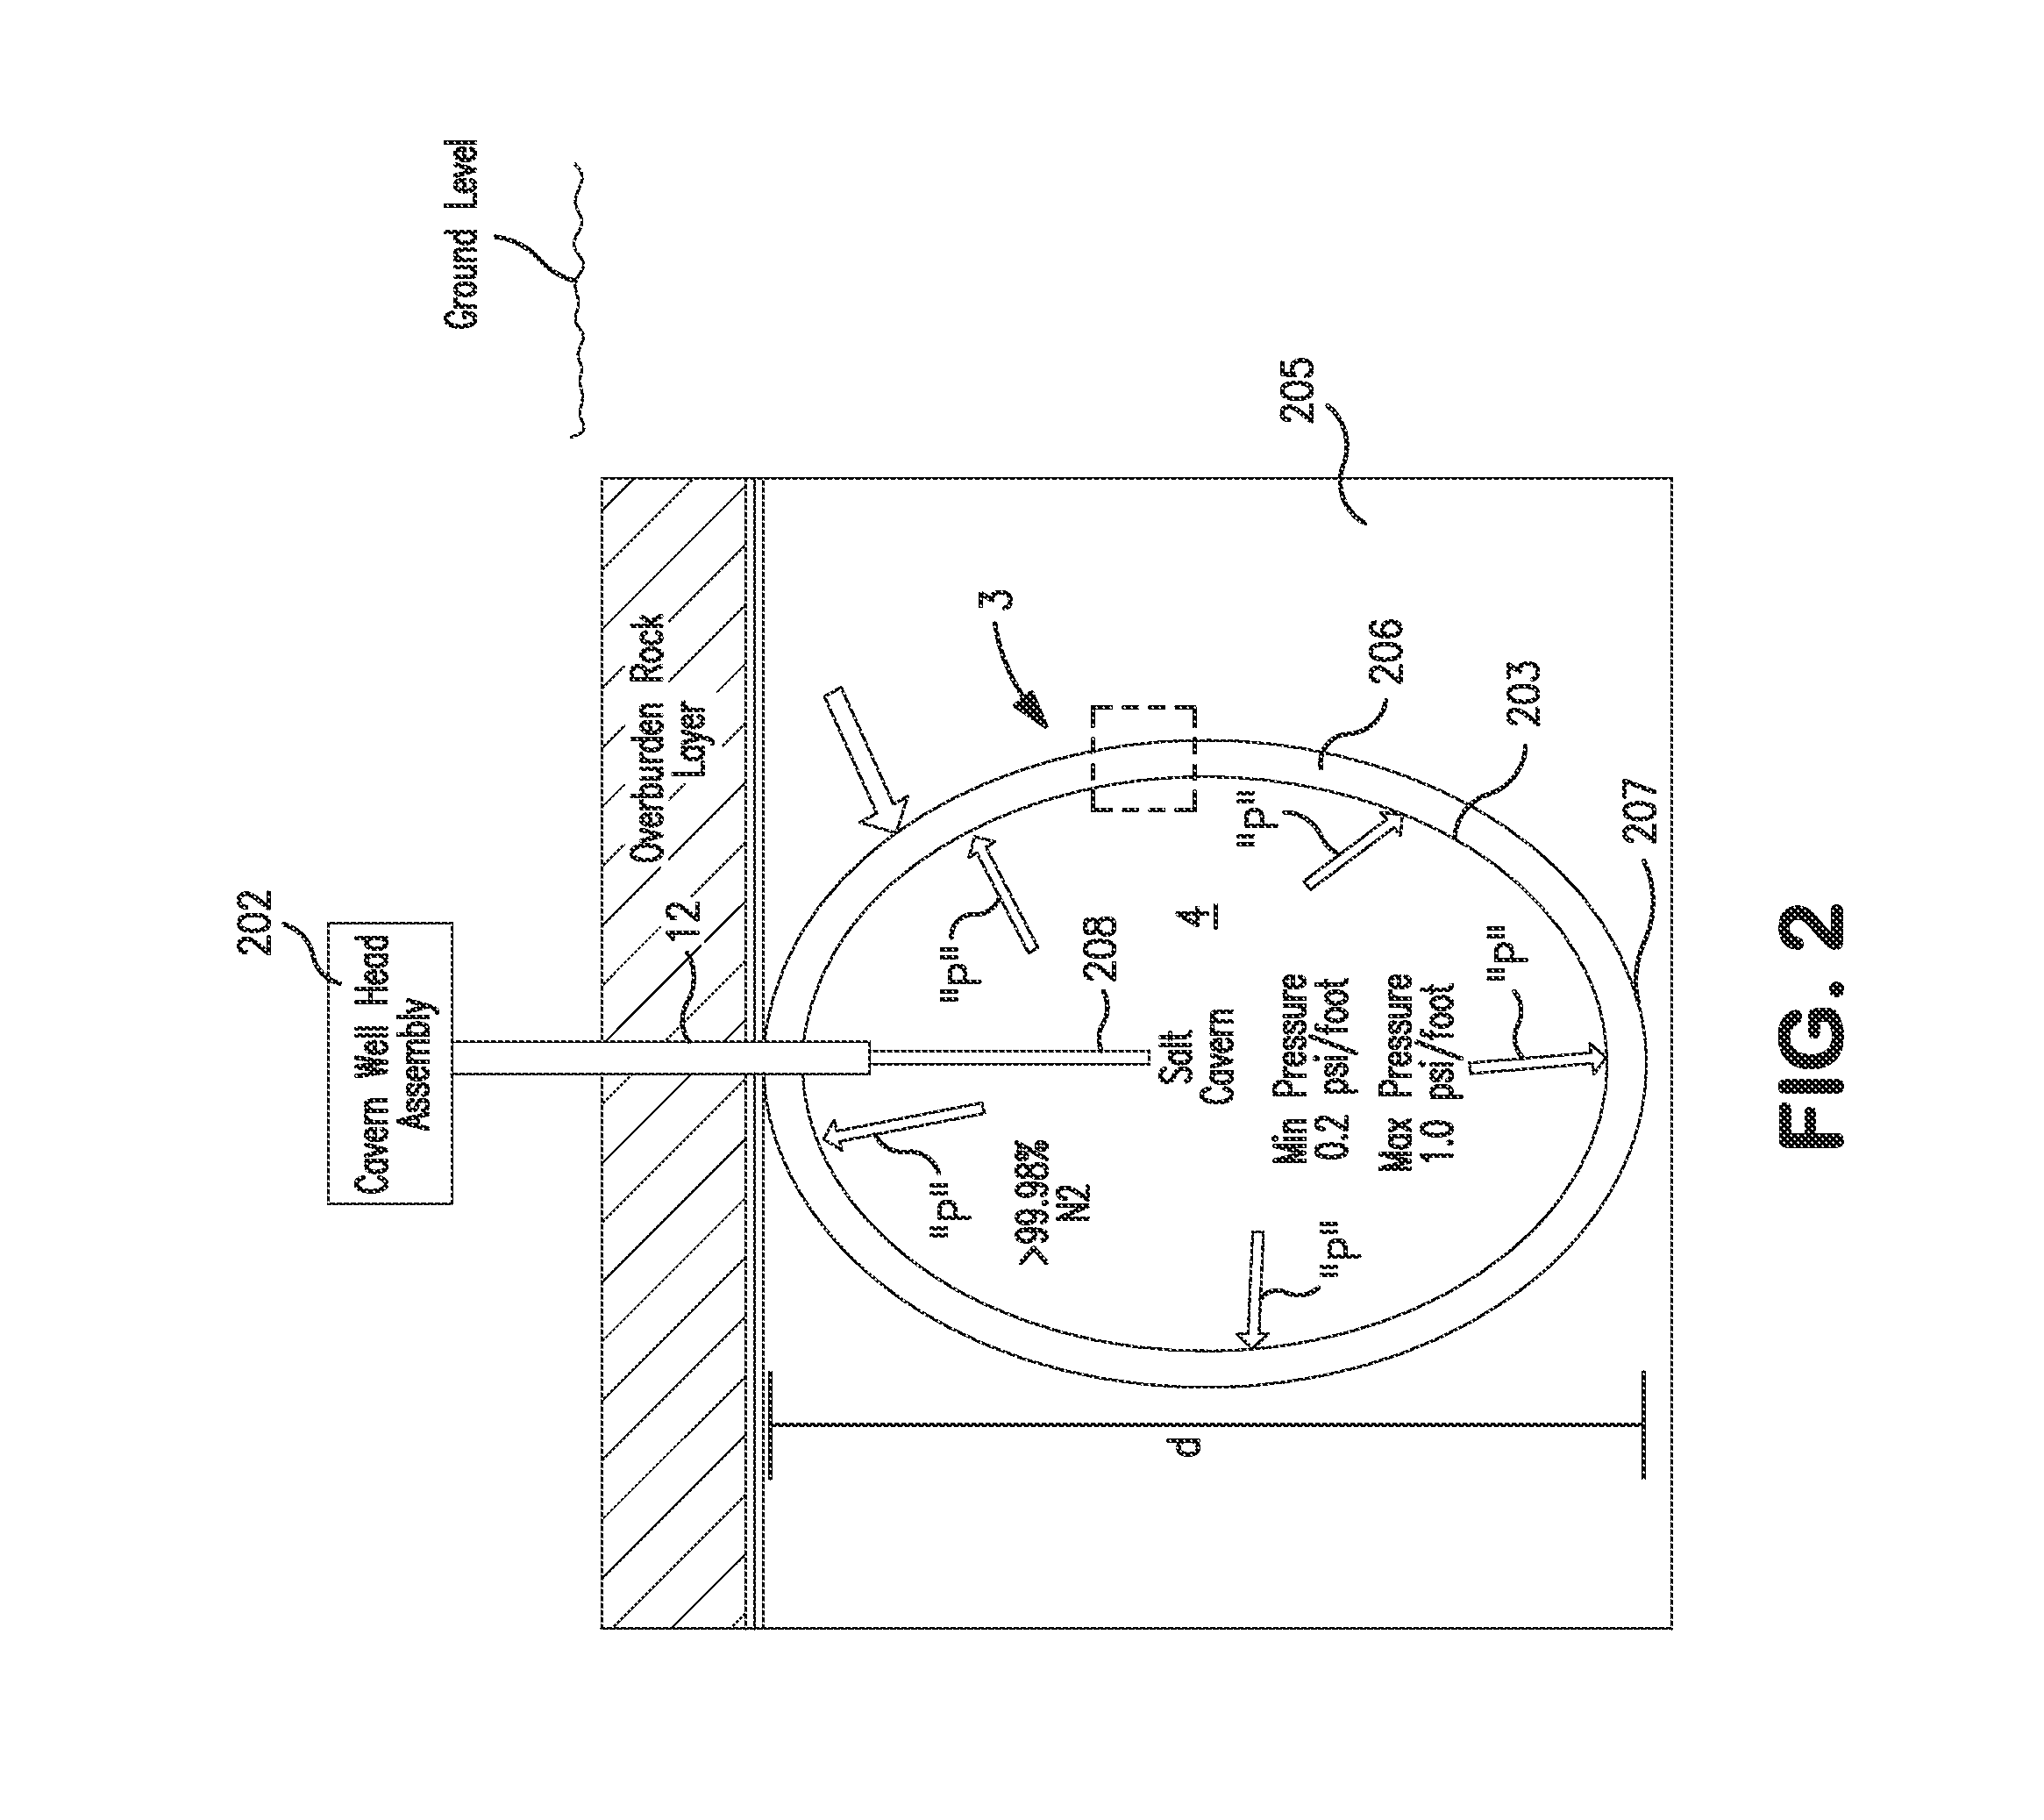 Method and system for storing hydrogen in a salt cavern with a permeation barrier